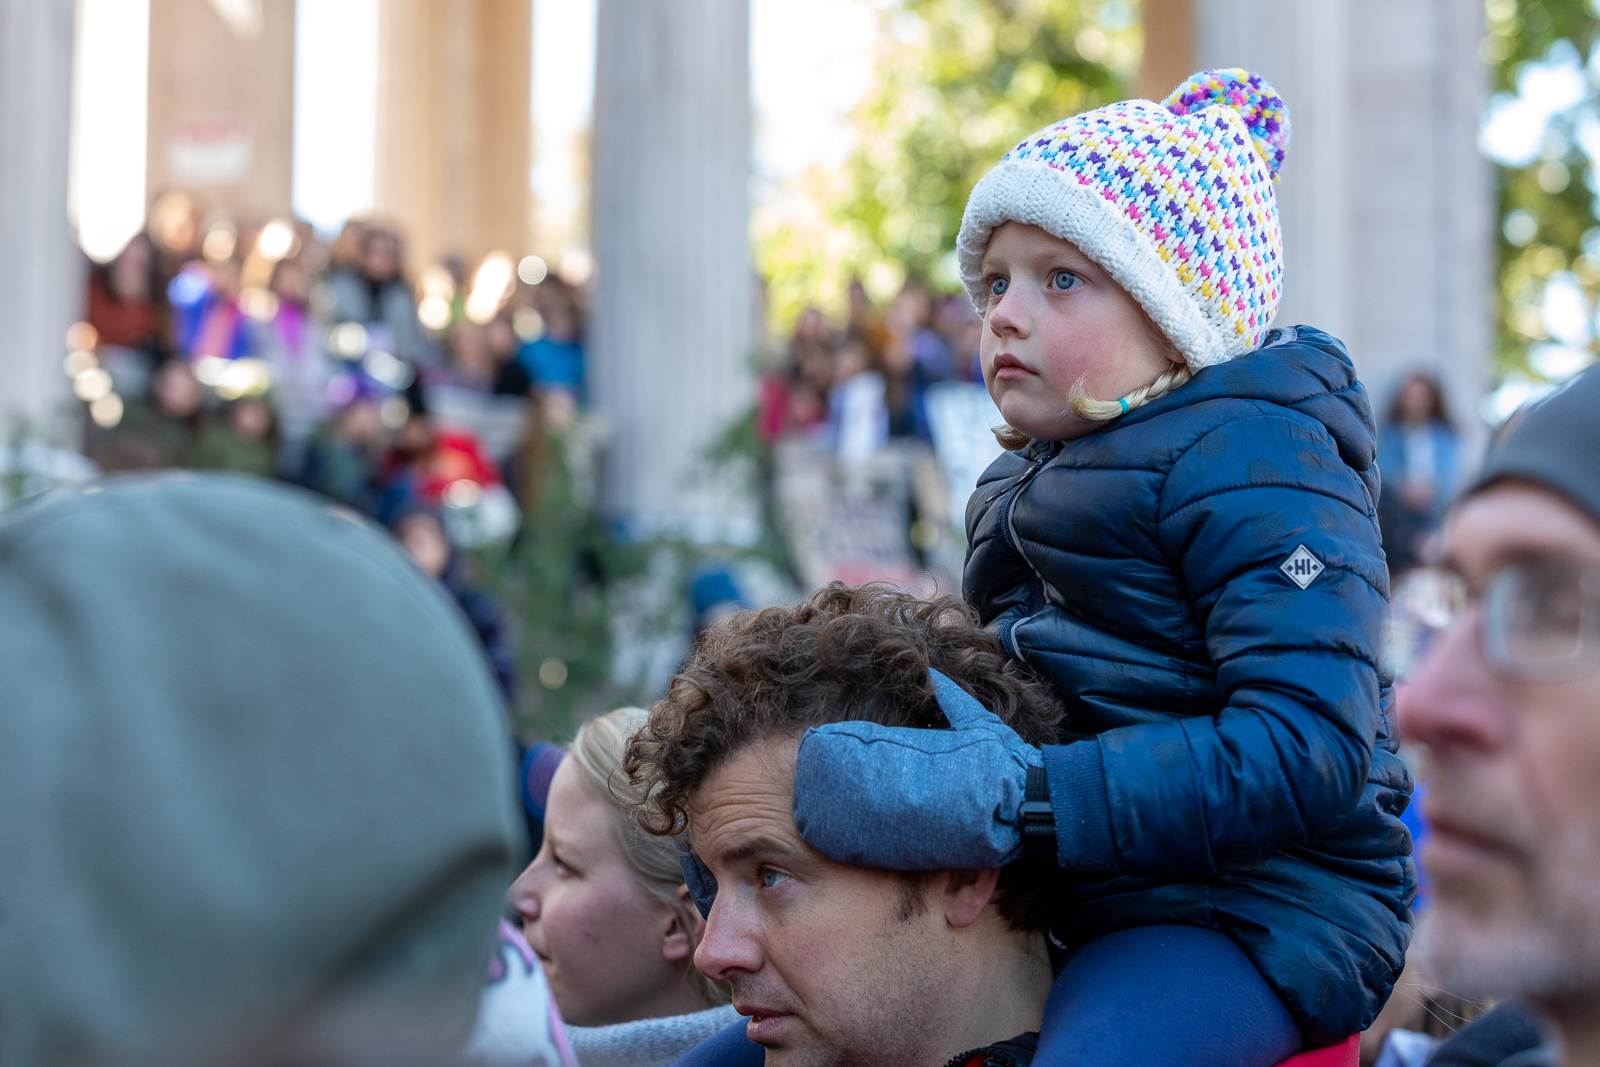 A girl watches speakers at the climate strike from the shoulders of a man. Photo: Andy Bosselman, Streetsblog Denver